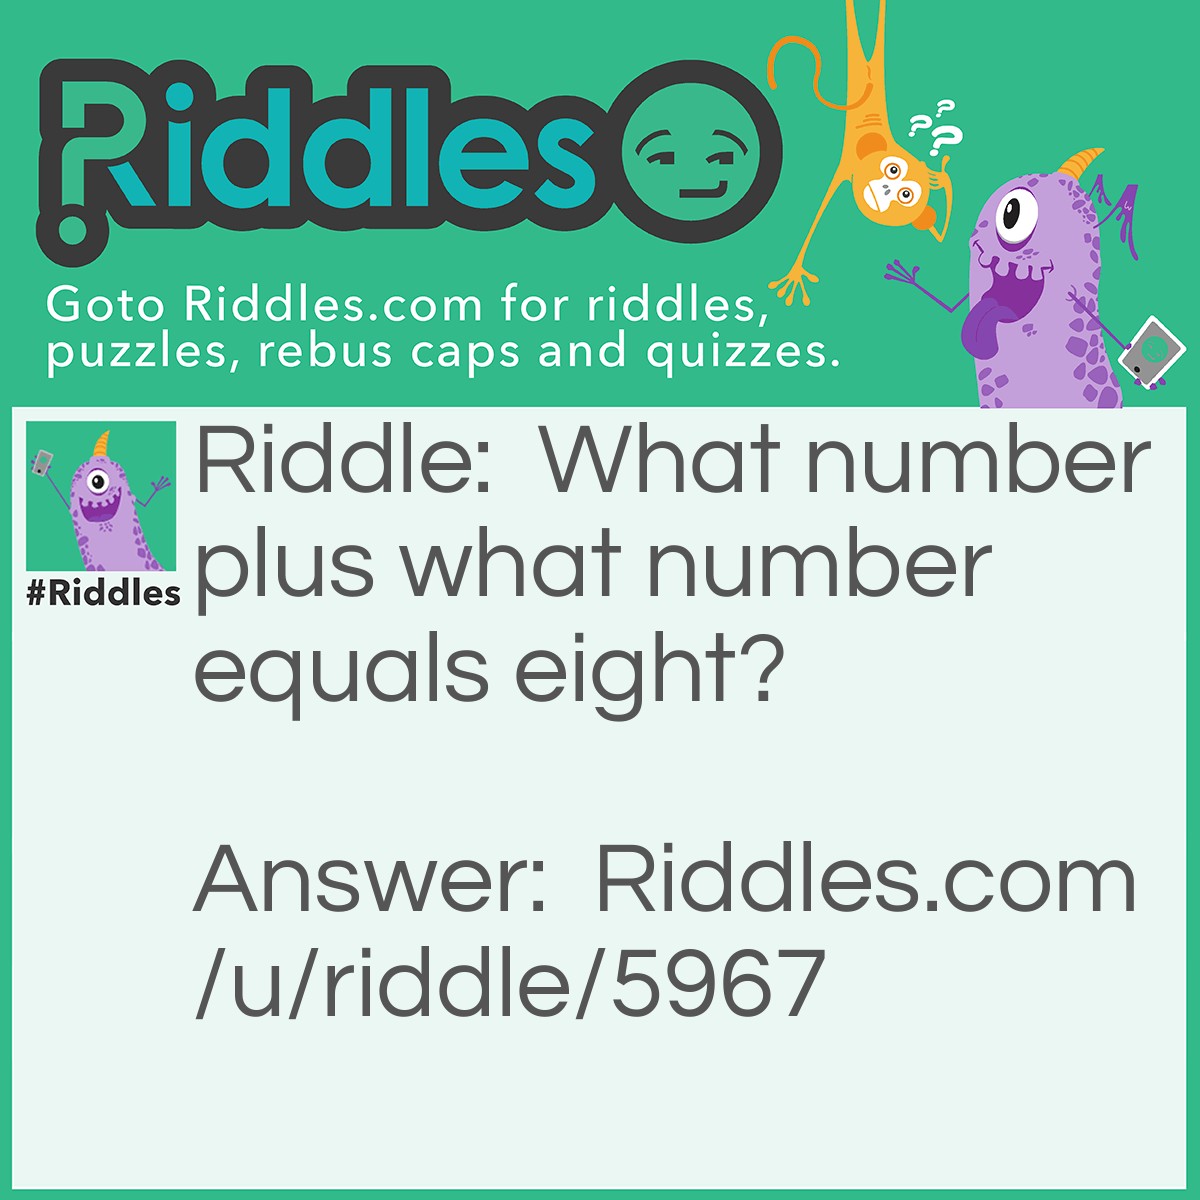 Riddle: What number plus what number equals eight? Answer: 0